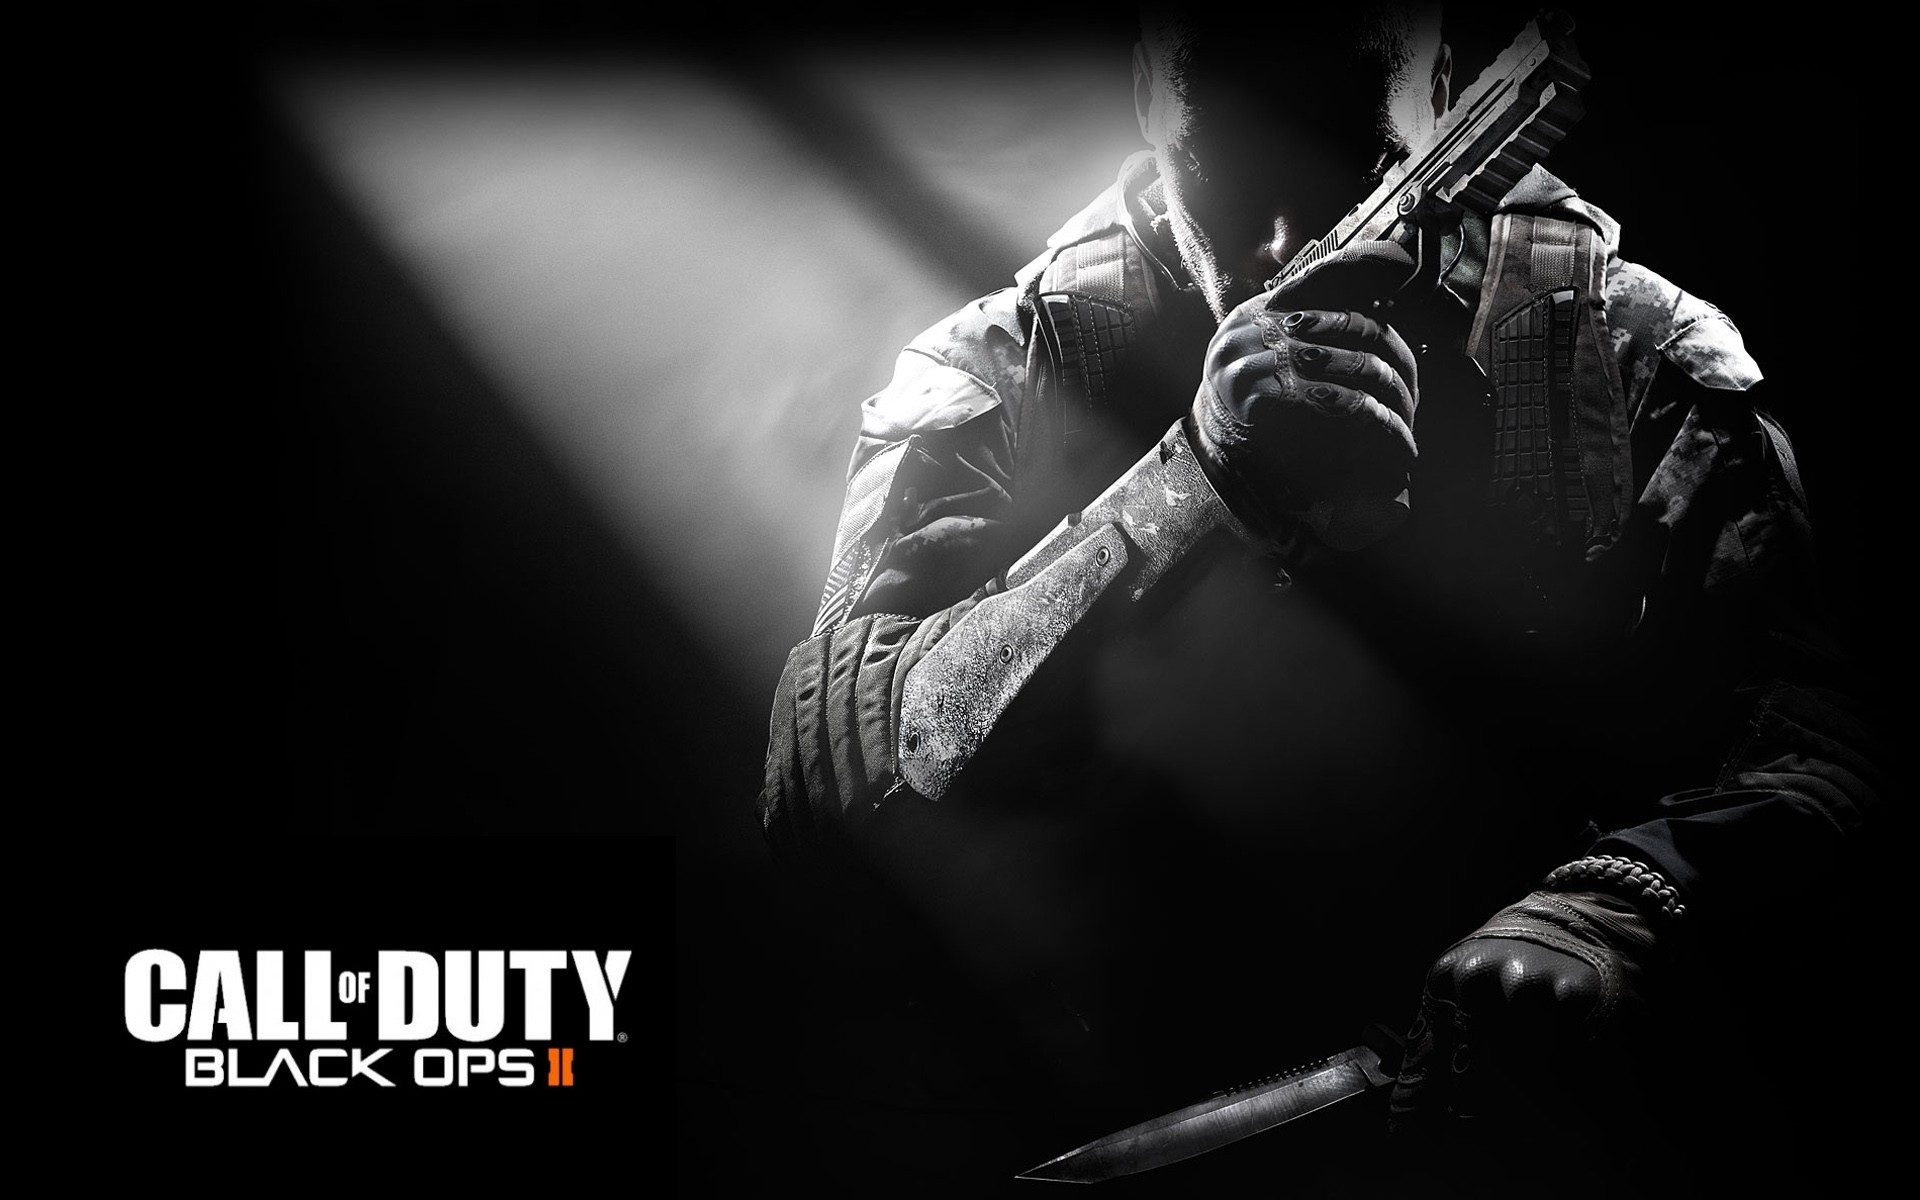 Black Ops 2 Wallpaper ① Download Free Hd Wallpapers For